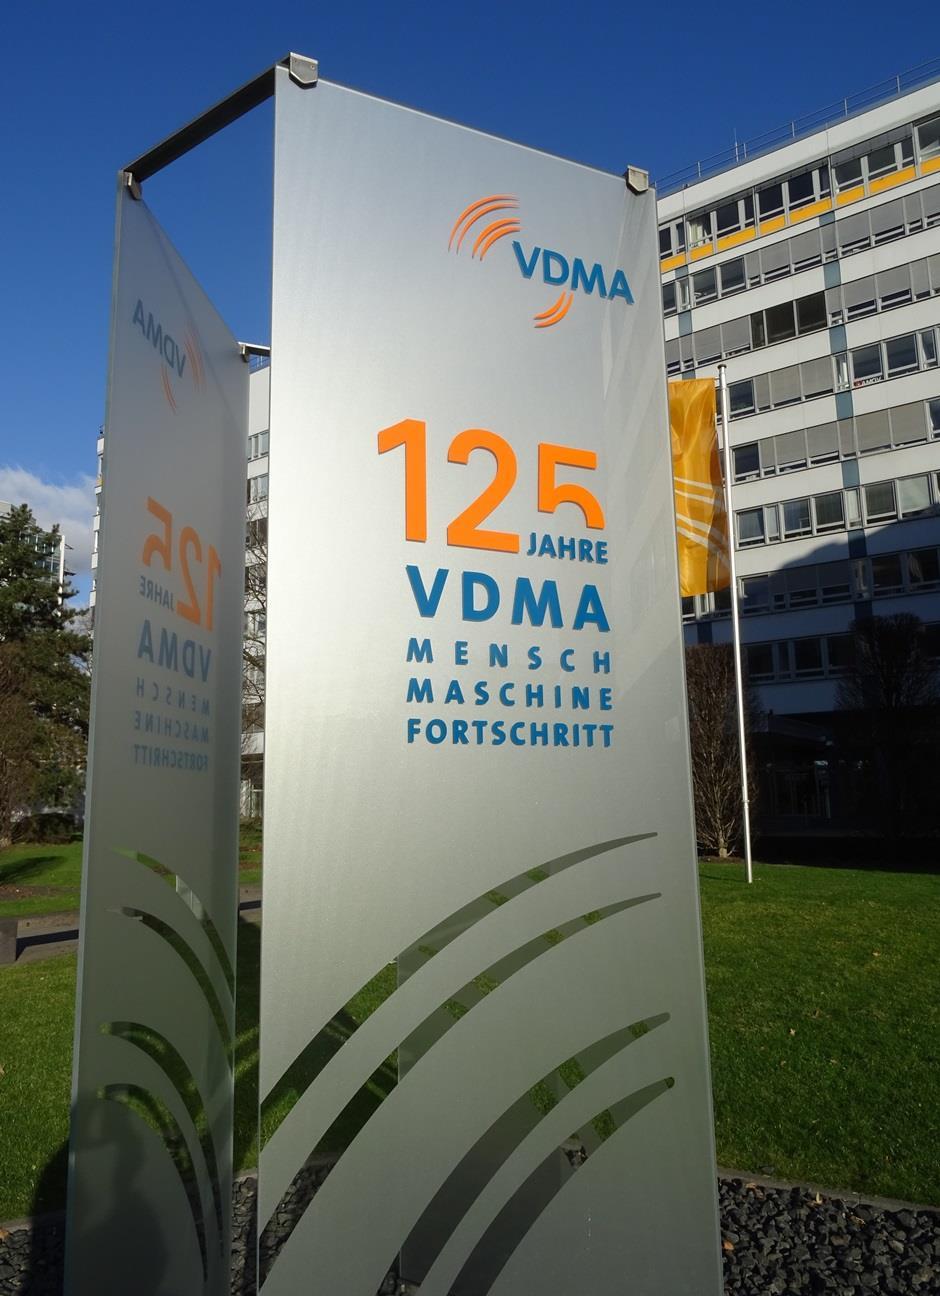 VDMA AGENDA Contents (1) The VDMA and Industrie 4.0 in the Mechanical Engineering Industry (2) Key facts on I4.